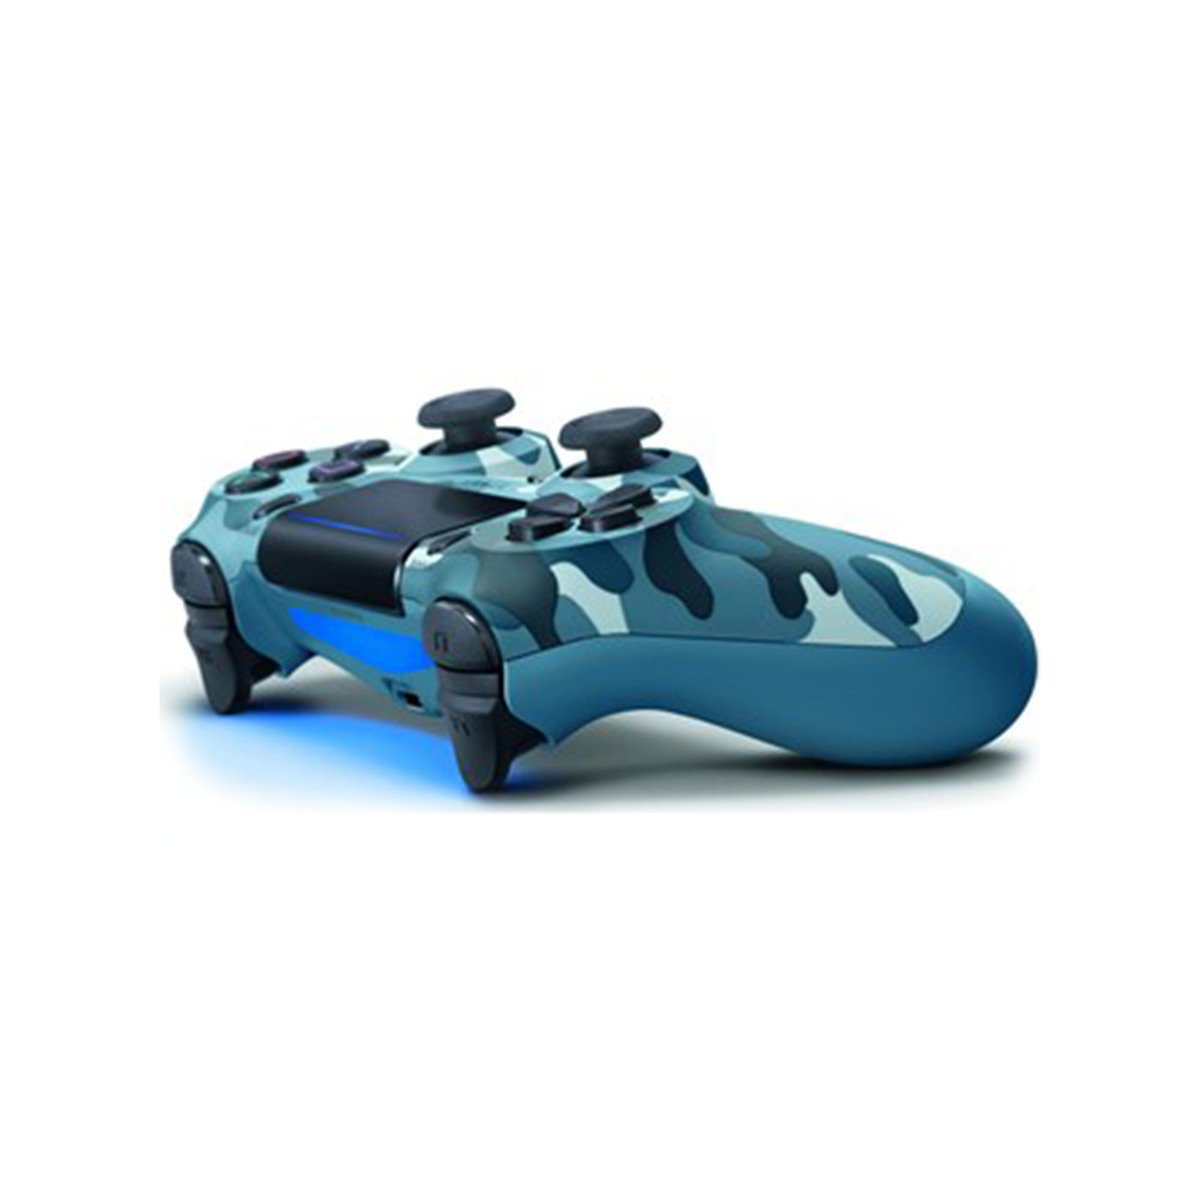 Sony Dual Shock 4 Wireless Controller for PlayStation 4 - Blue Camouflage